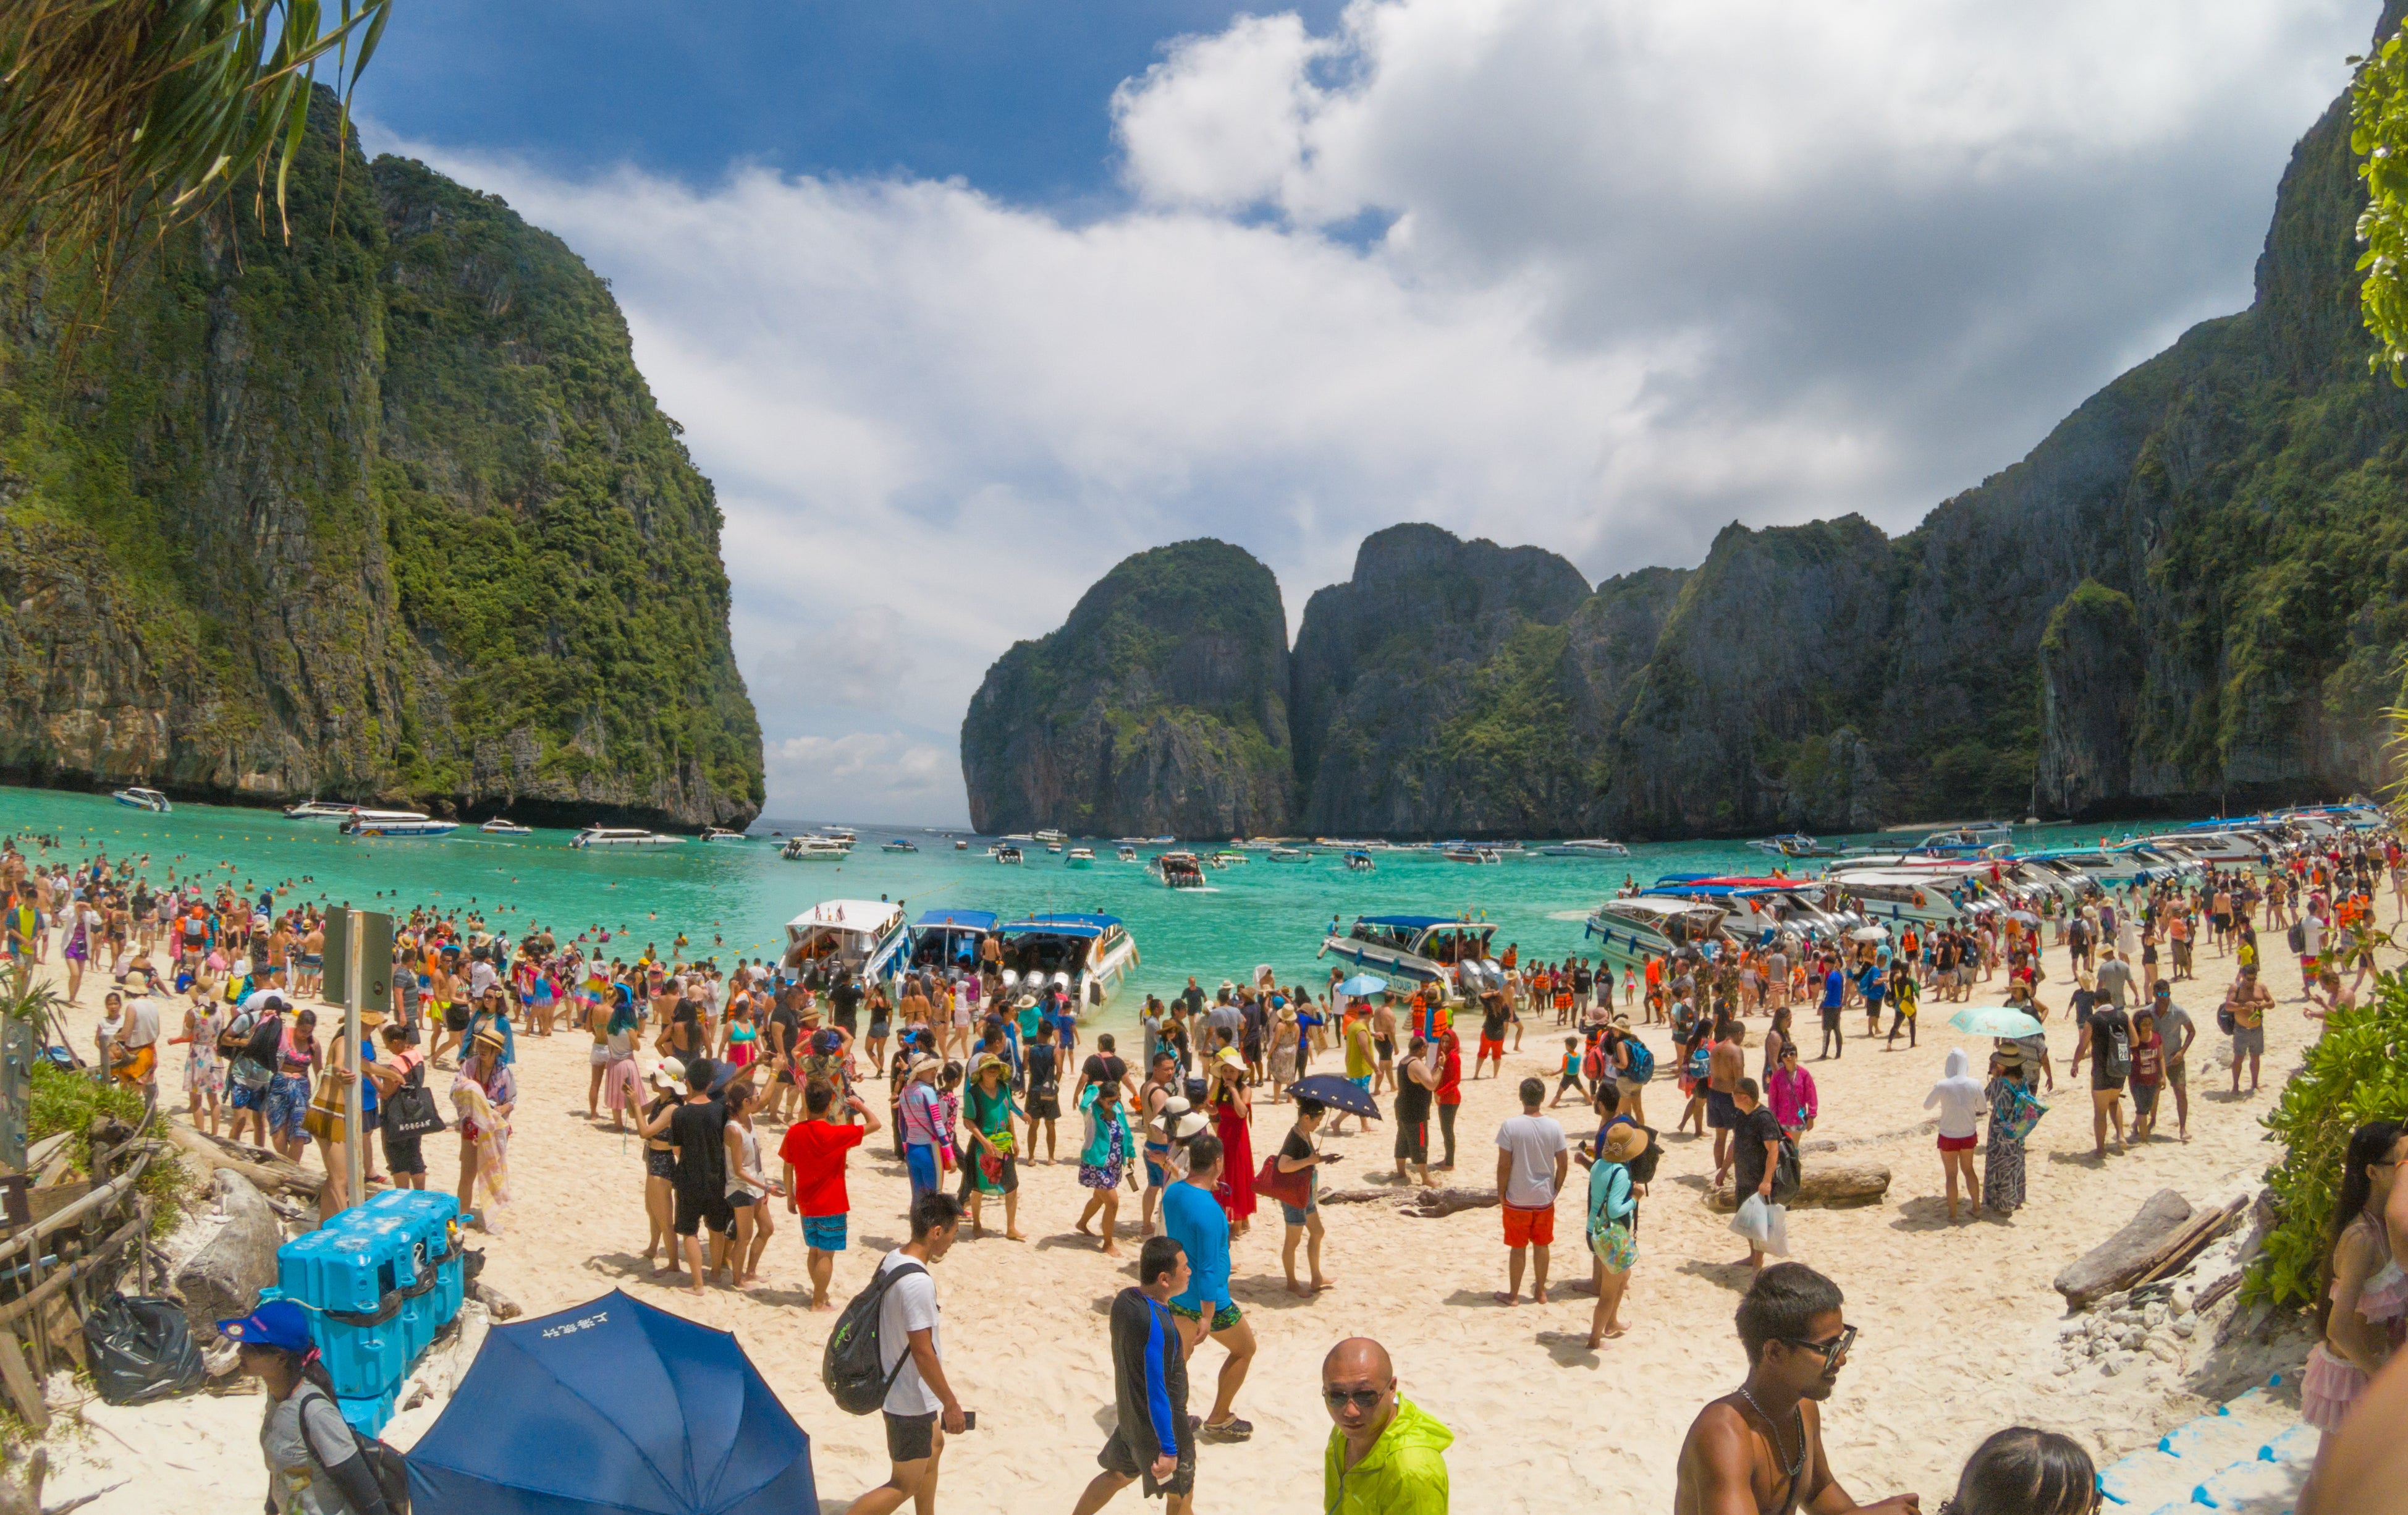 A swimming ban remains in place at reopened Maya Beach to protect the coral